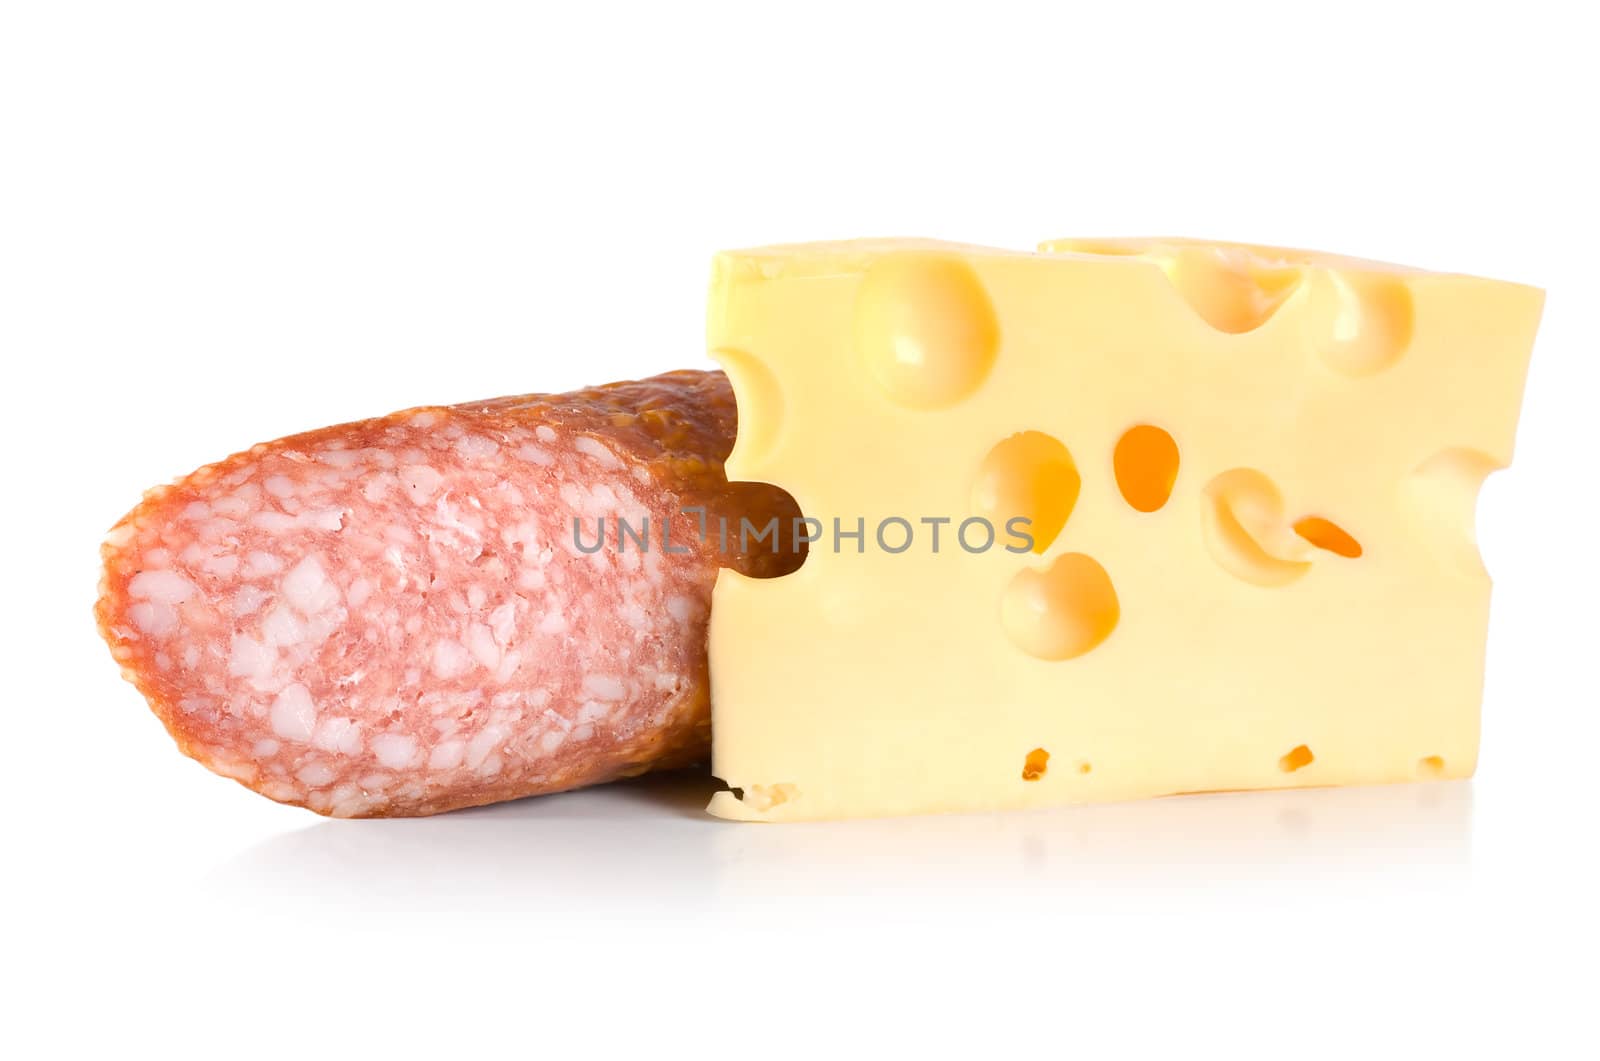 Cheese and sausage isolated on white background